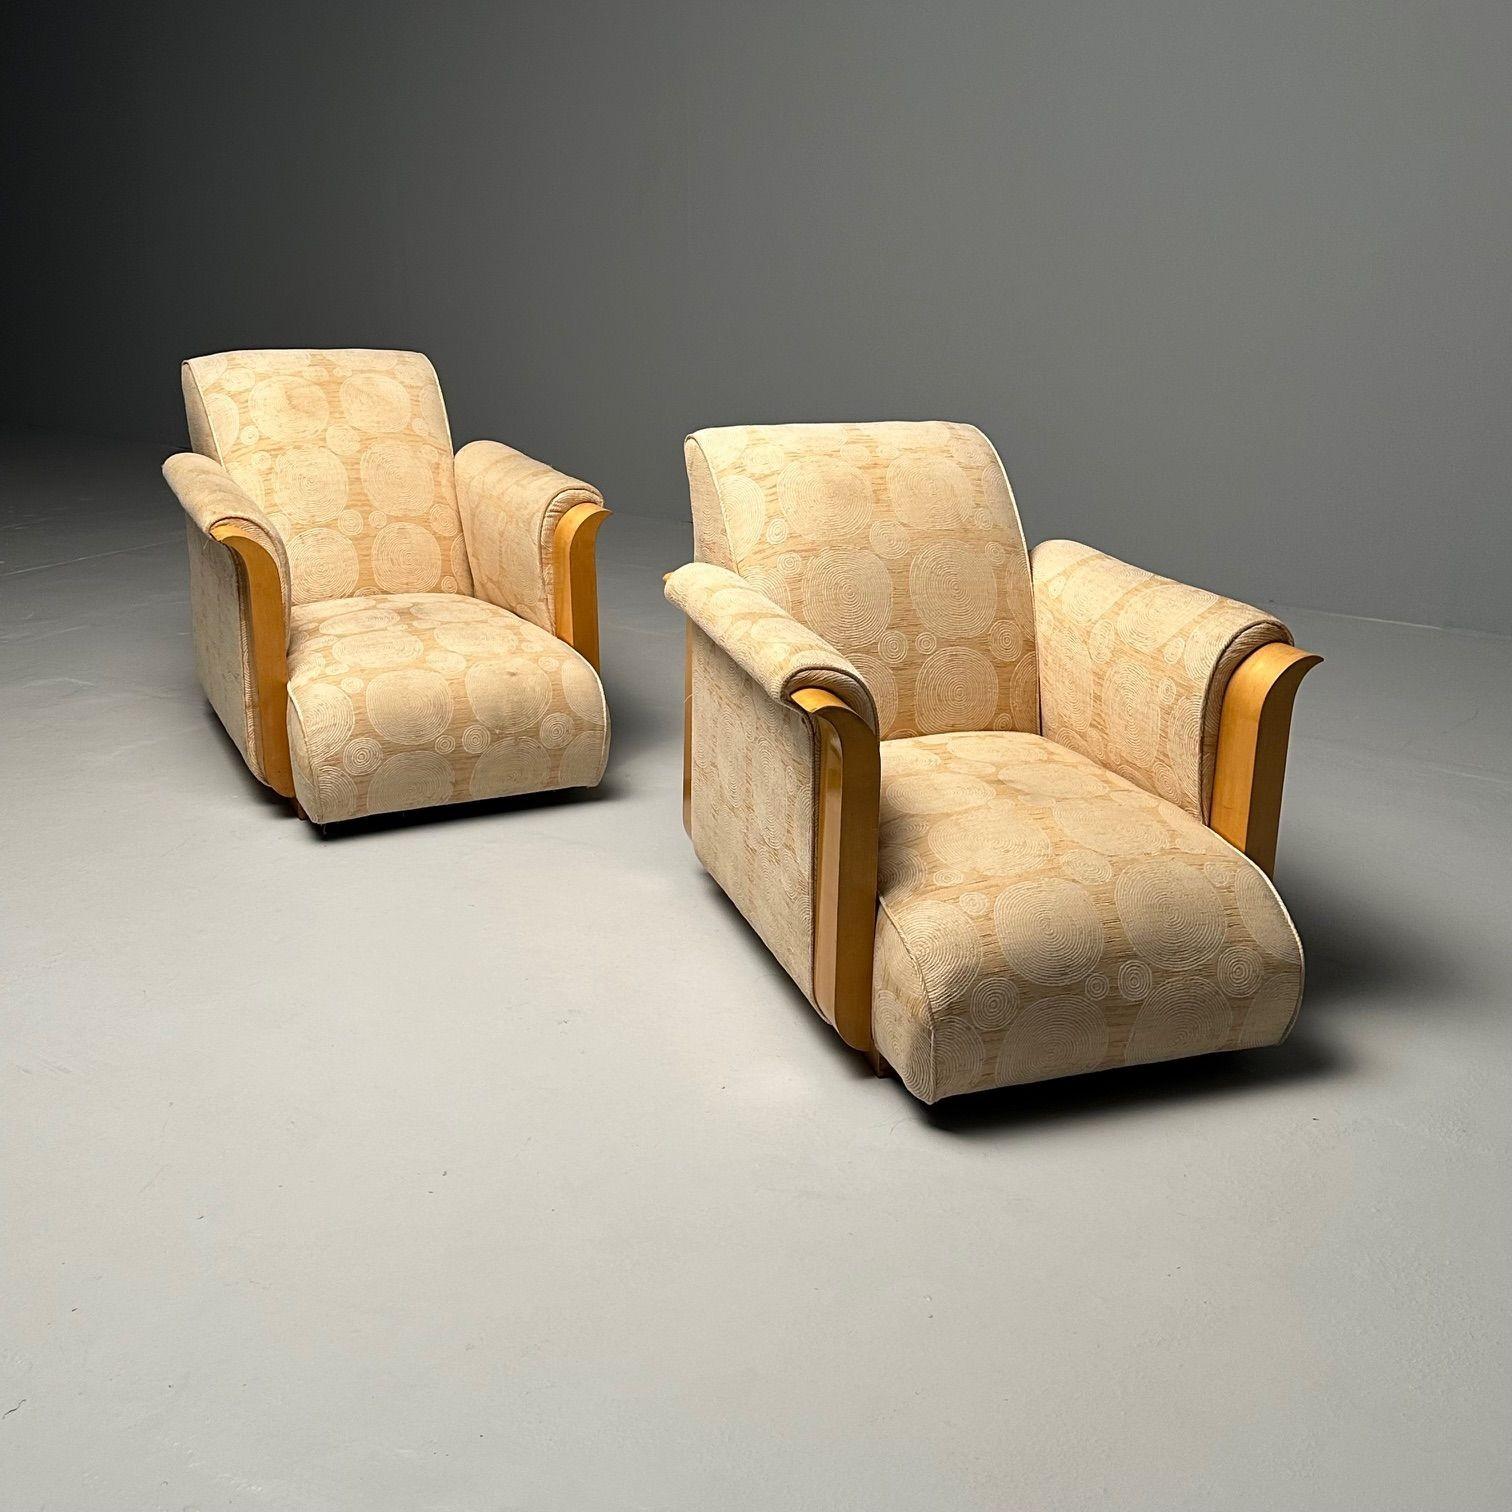 Rare Pair of French Art Deco Lounge Chairs by Michel Dufet, France, 1930s For Sale 1